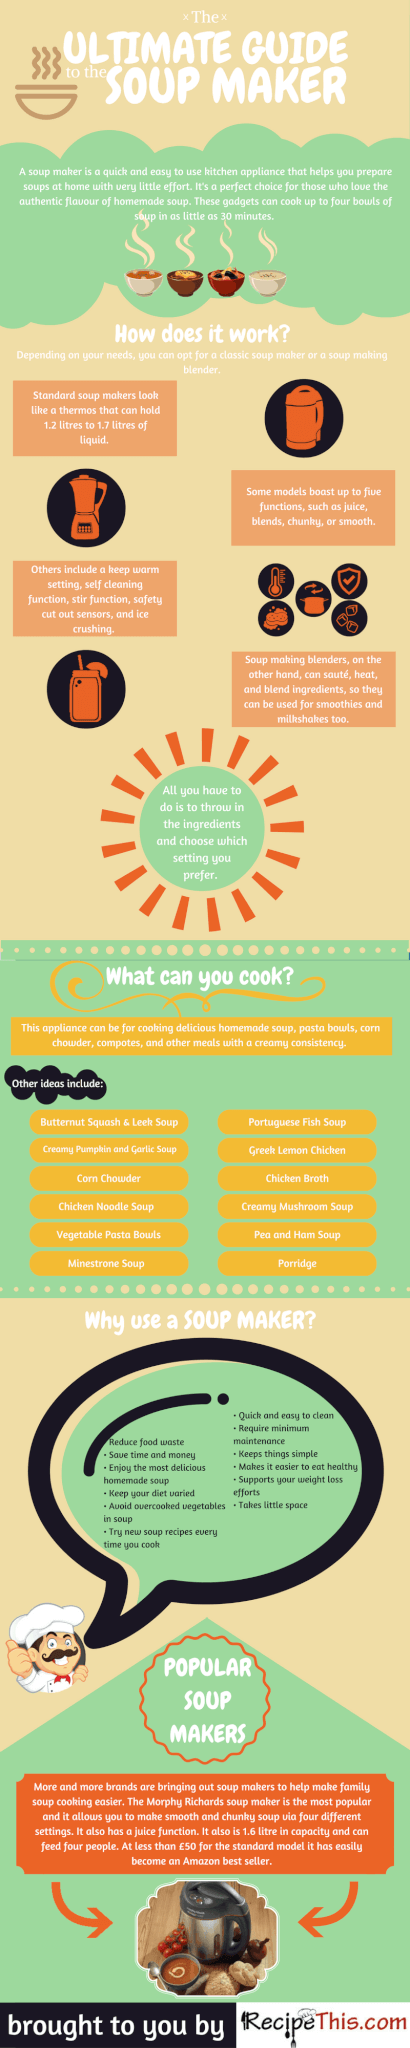 The Ultimate Guide To The Soup Maker Infographic